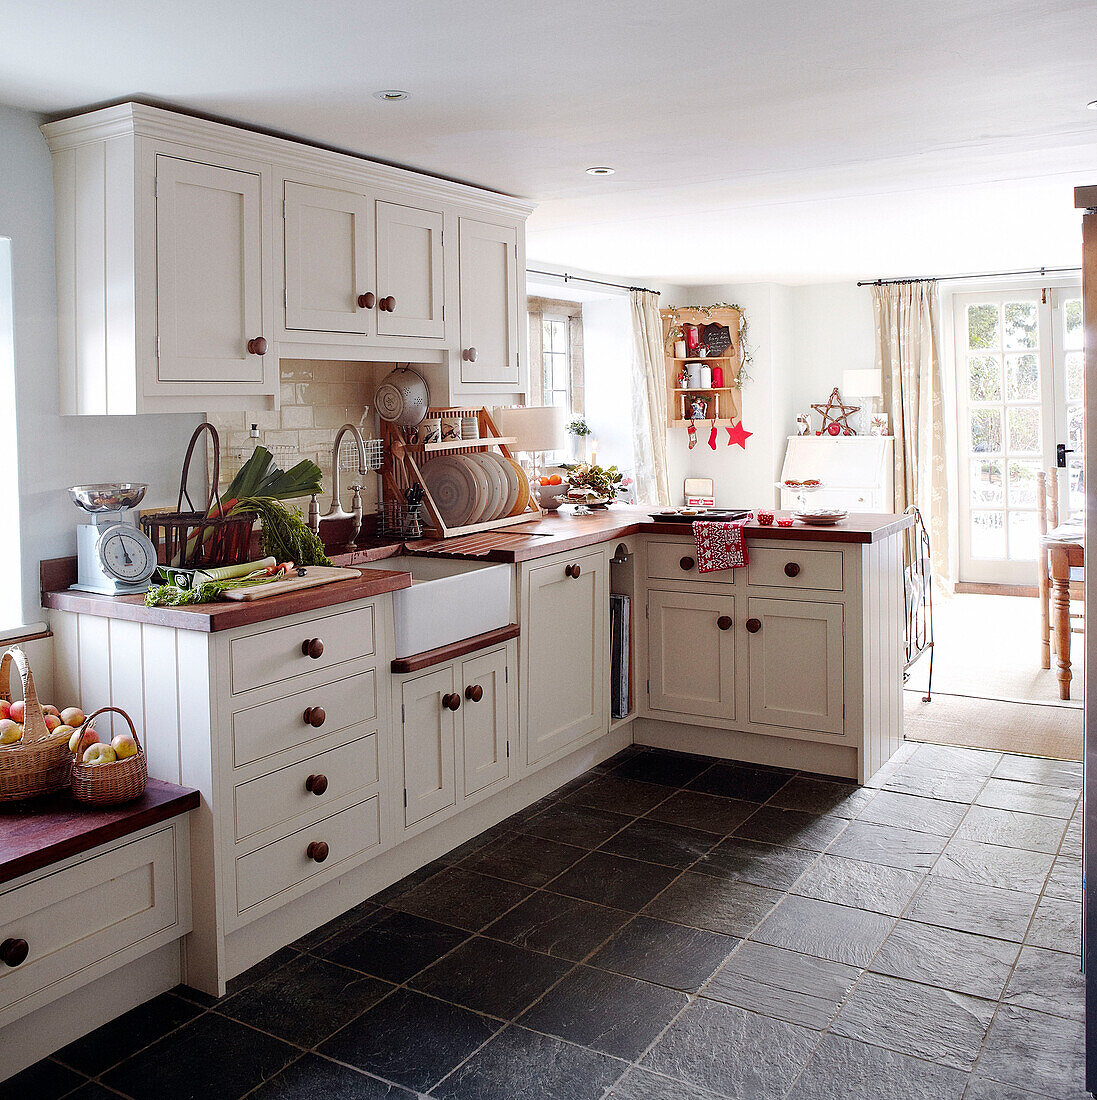 White fitted sunlit kitchen with grey tiled floor